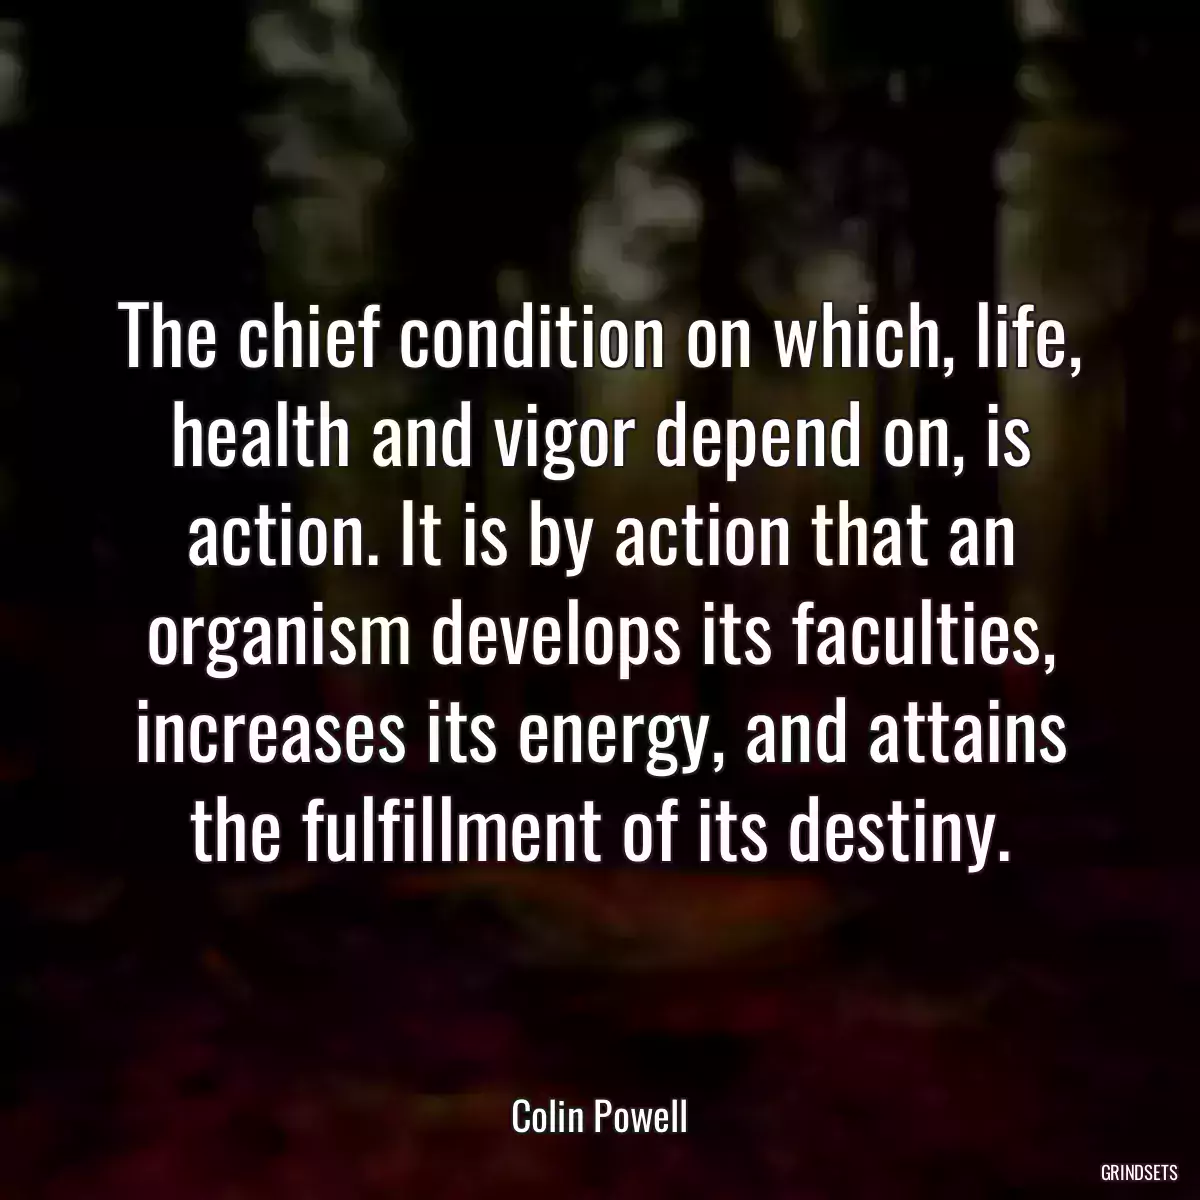 The chief condition on which, life, health and vigor depend on, is action. It is by action that an organism develops its faculties, increases its energy, and attains the fulfillment of its destiny.